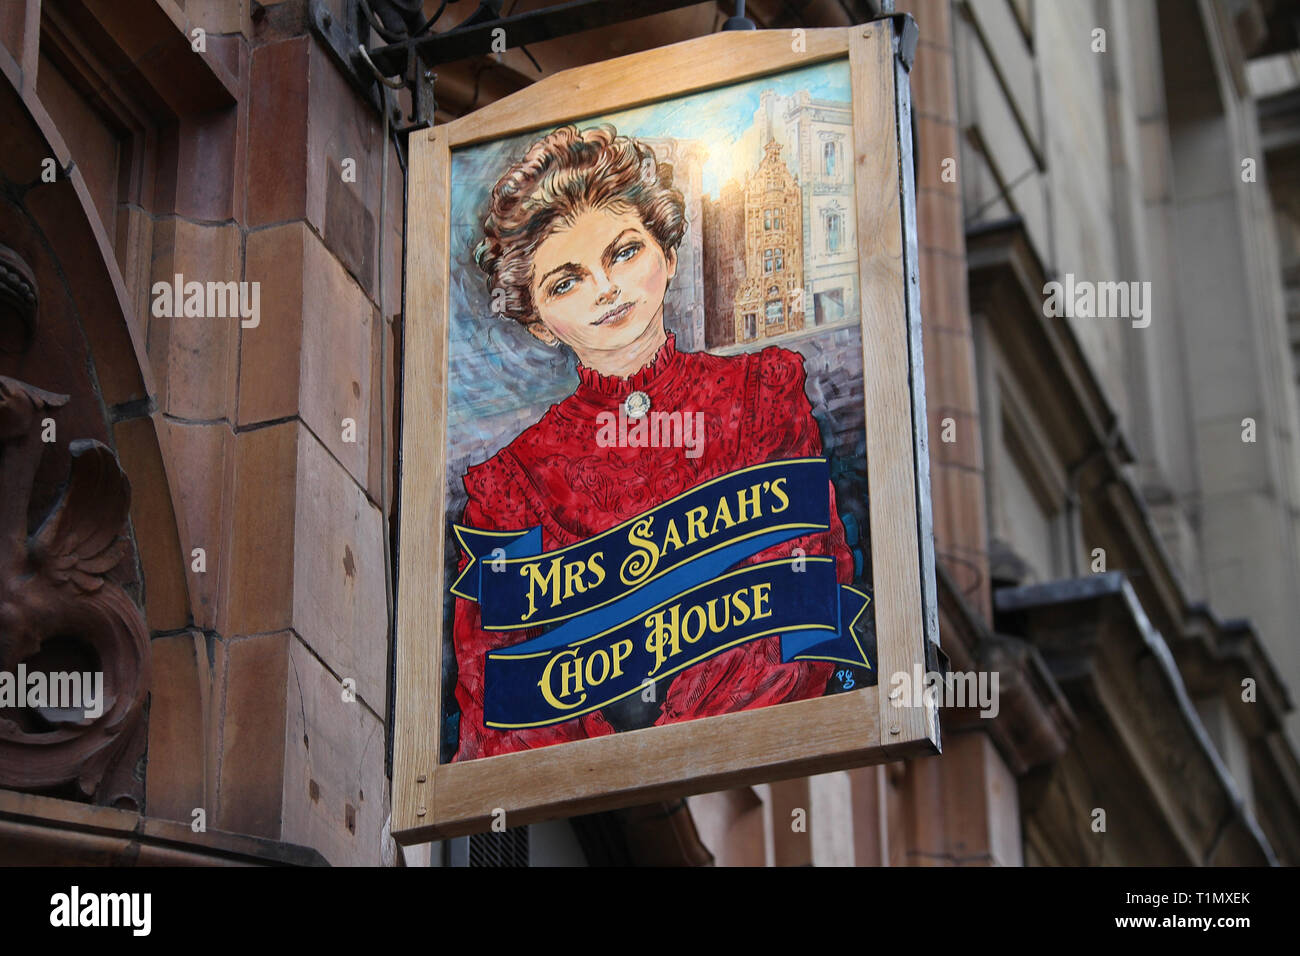 Mrs Sarah's Chop House Sign in Manchester Stock Photo